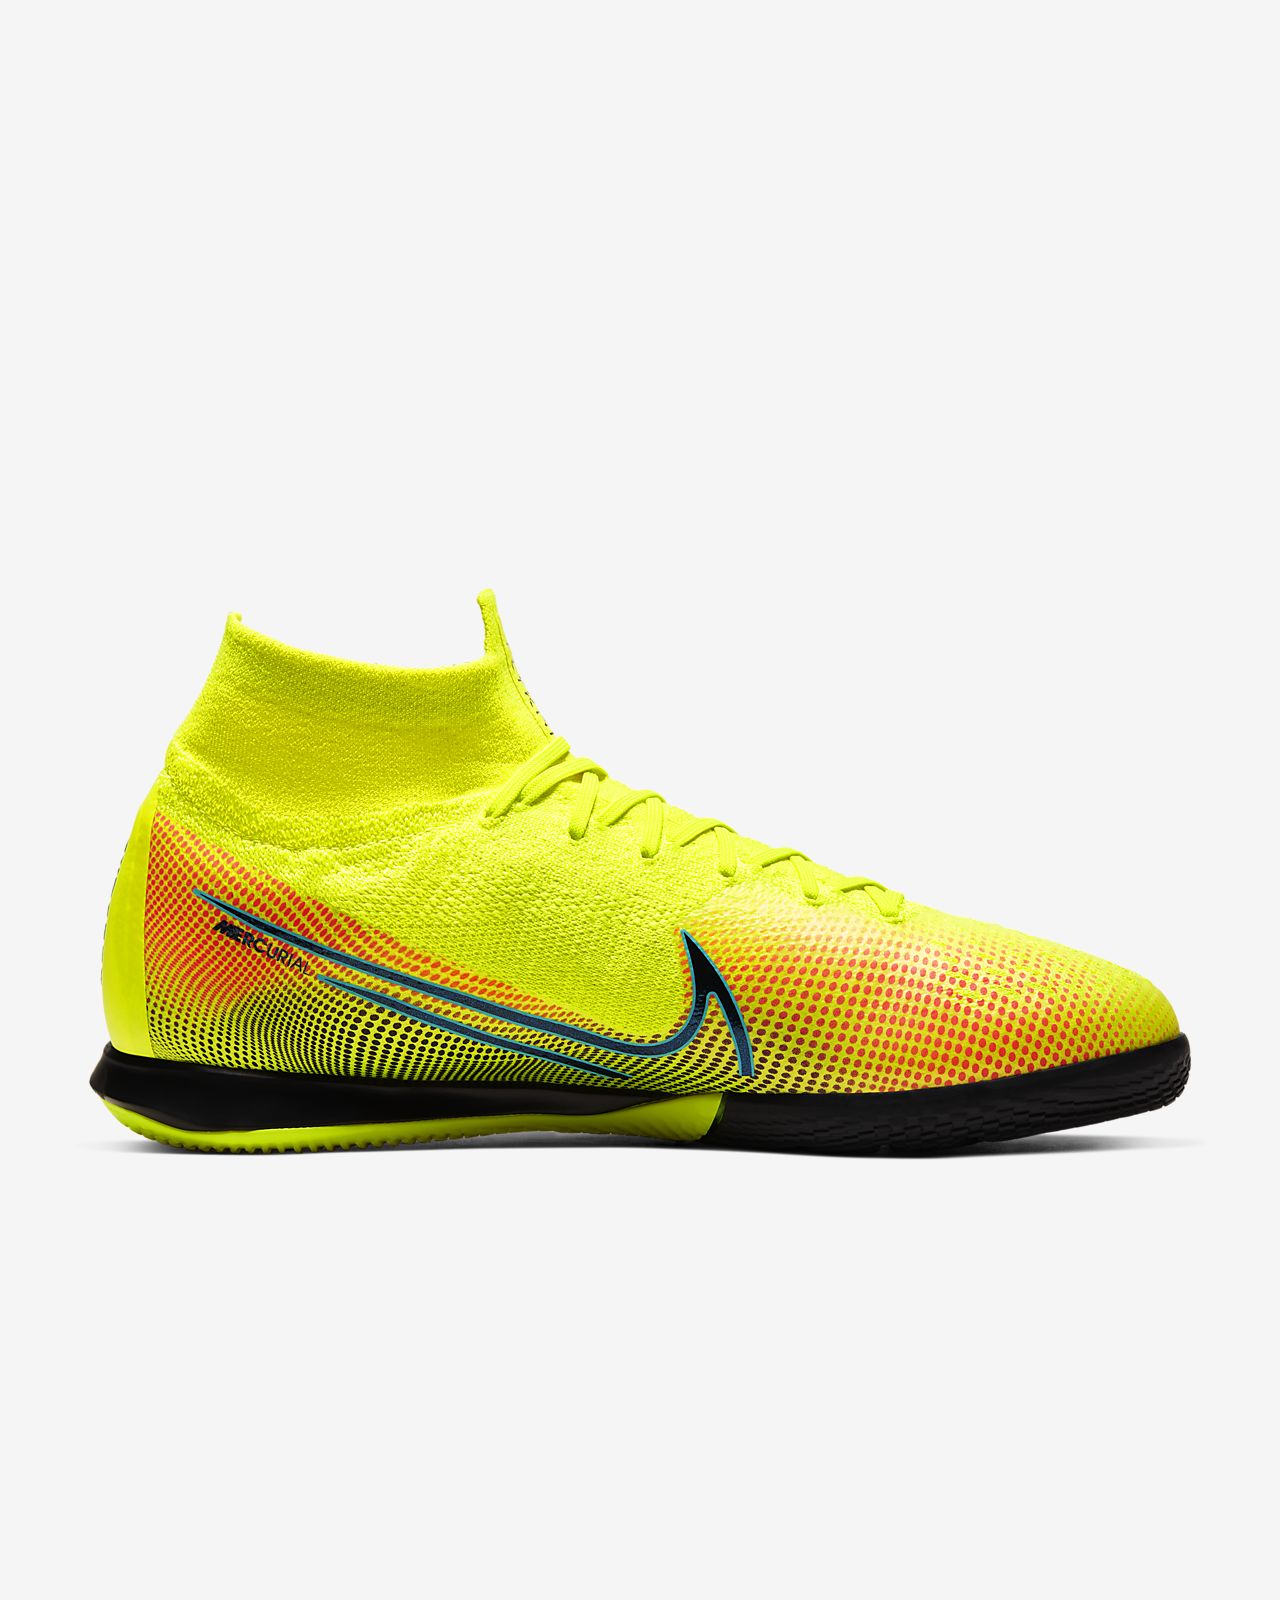 Nike Mercurial Superfly 7 Elite MDS TF Artificial Turf Soccer.